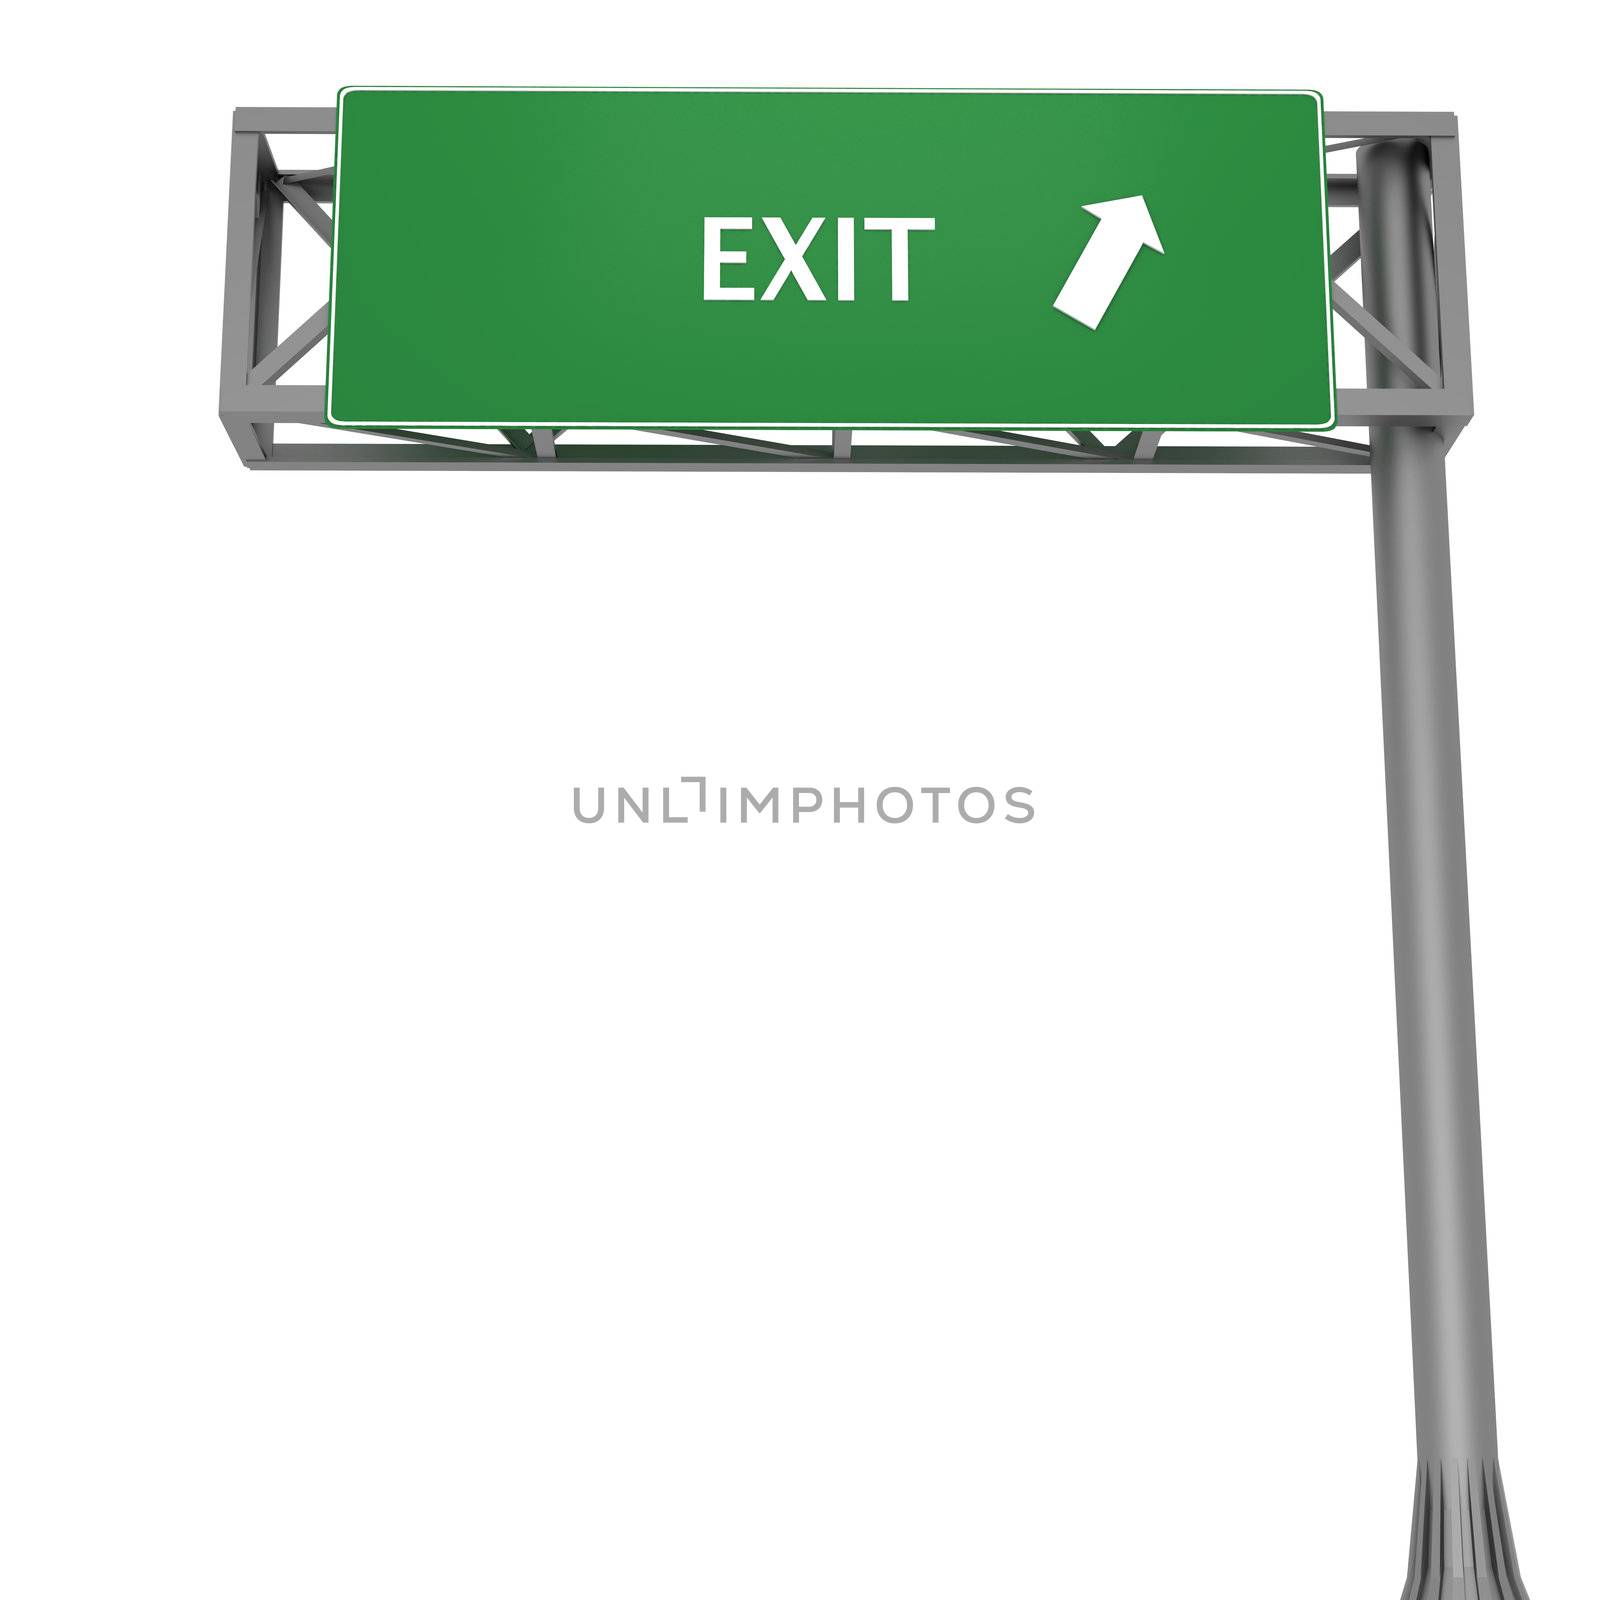 Exit signboard by Harvepino